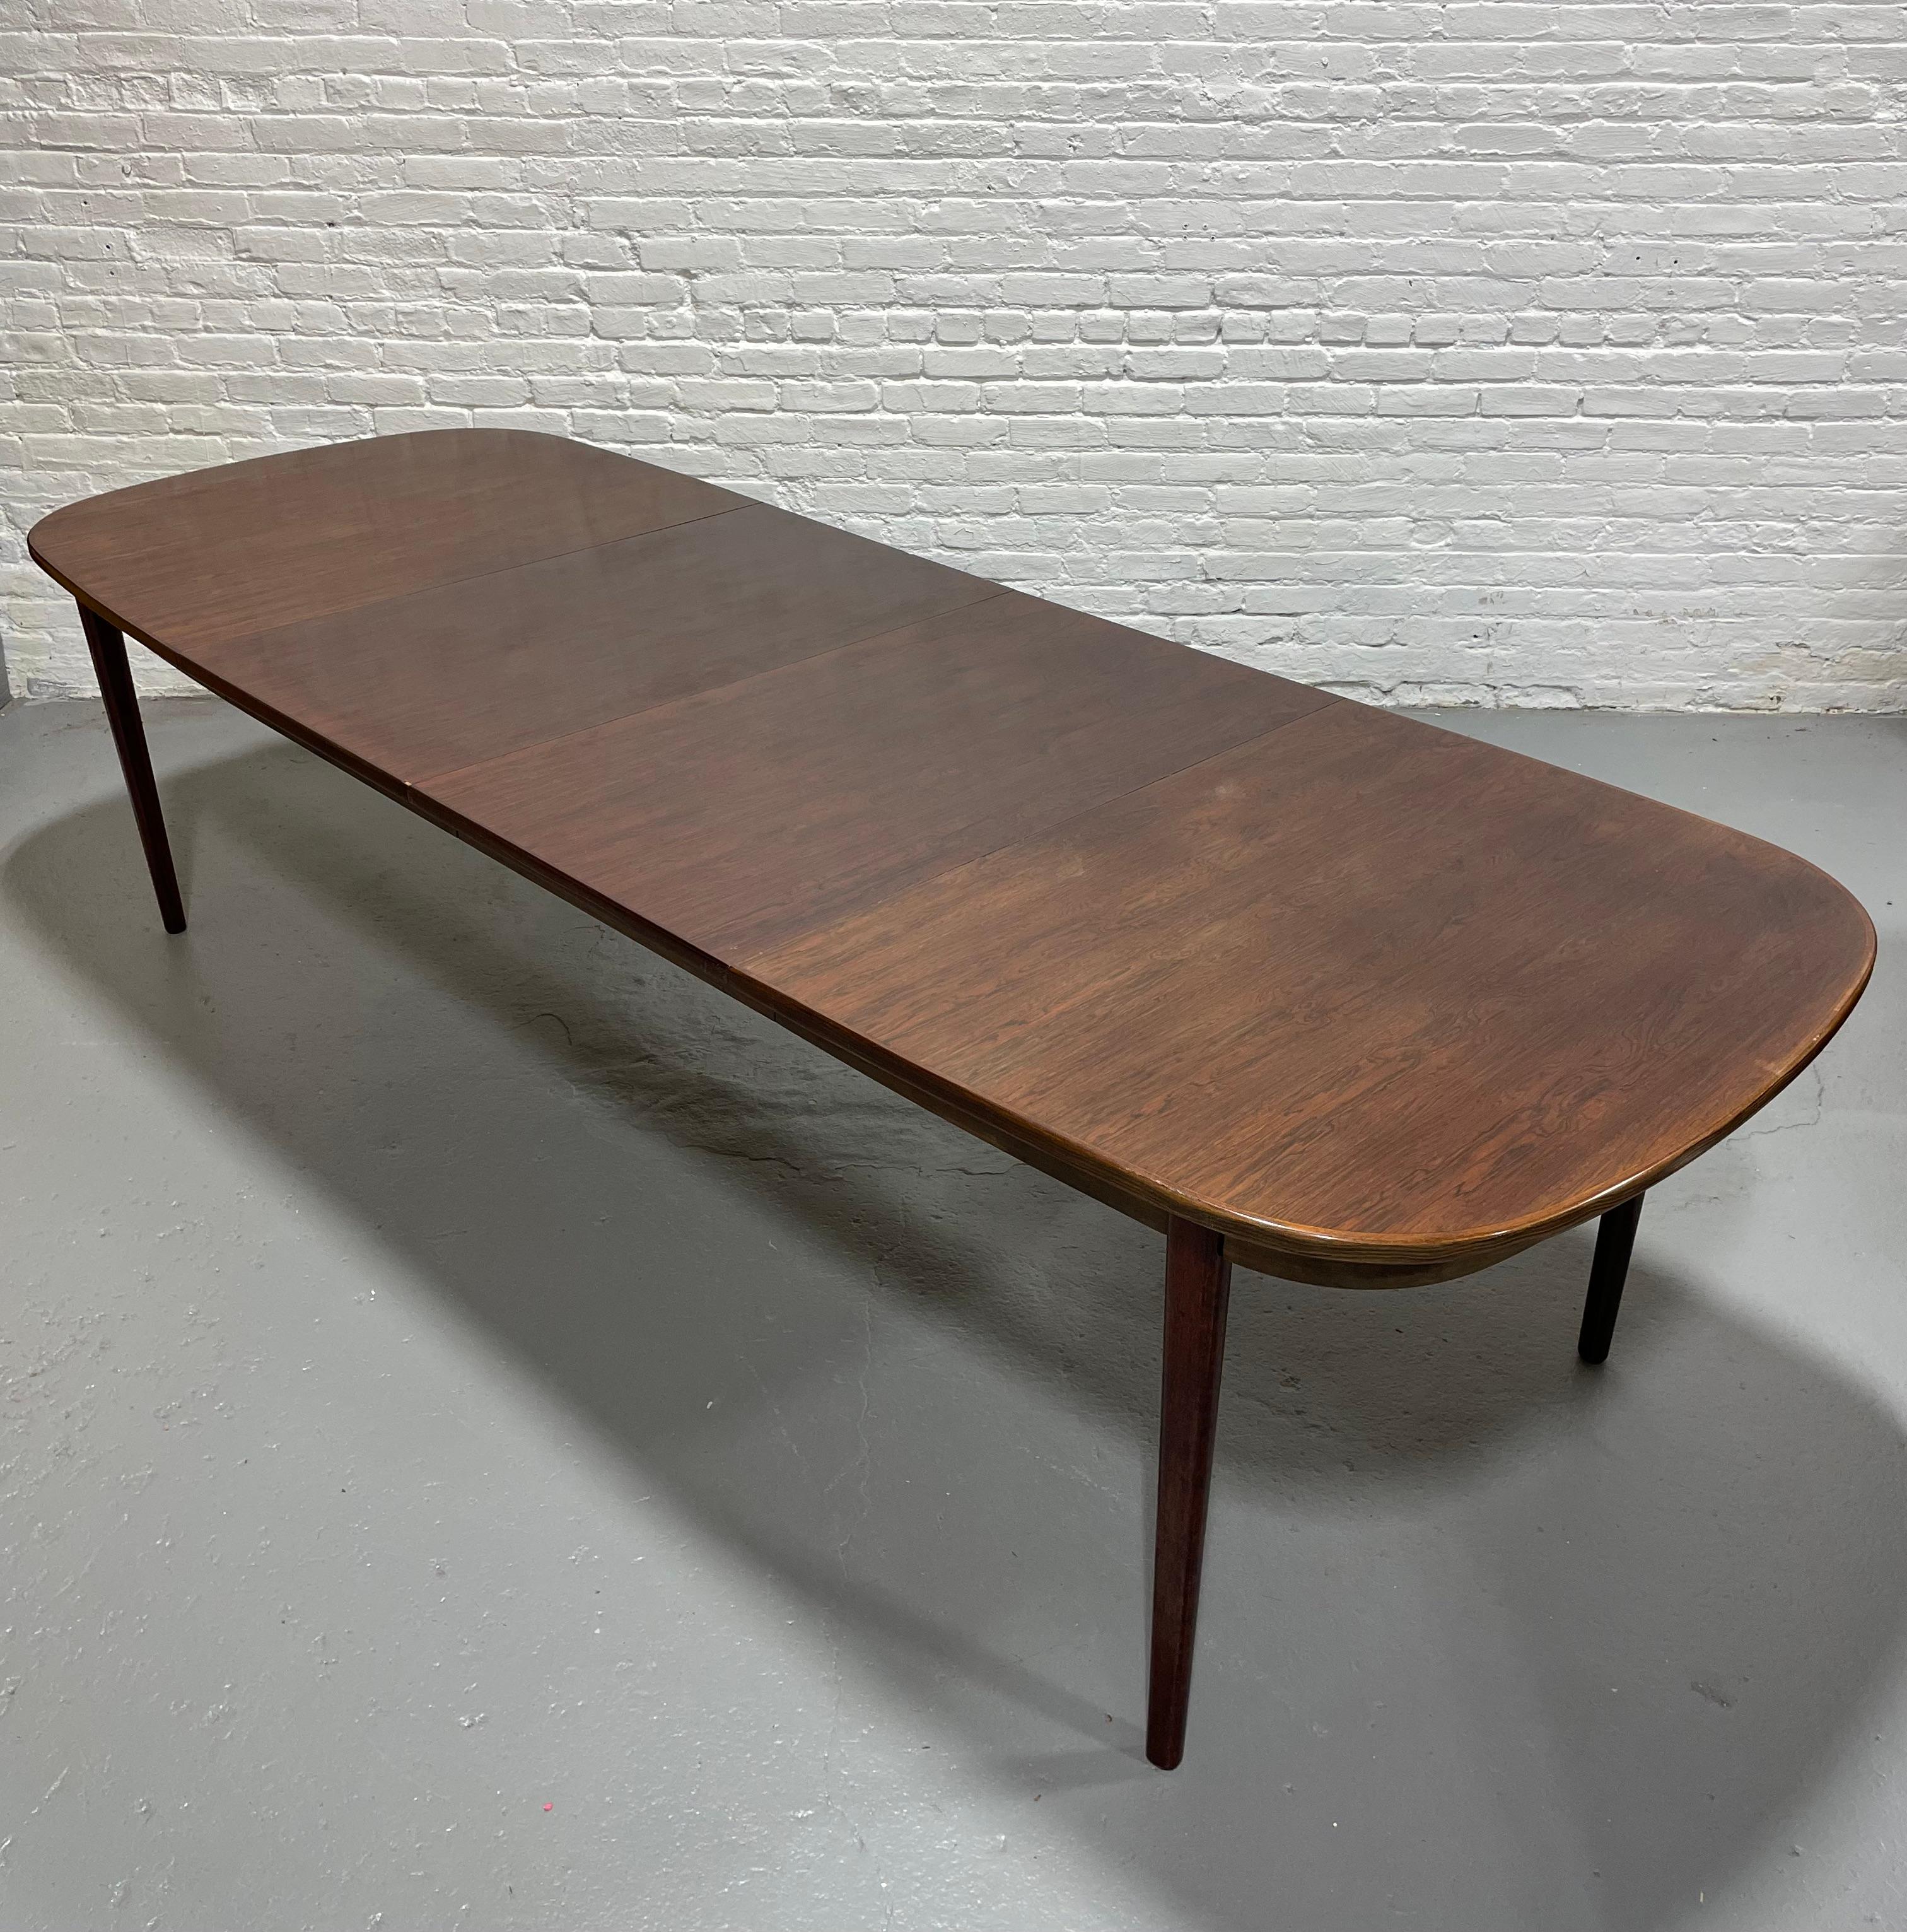 Extra LONG Mid Century Modern ROSEWOOD DINING Table, c. 1960’s For Sale 5